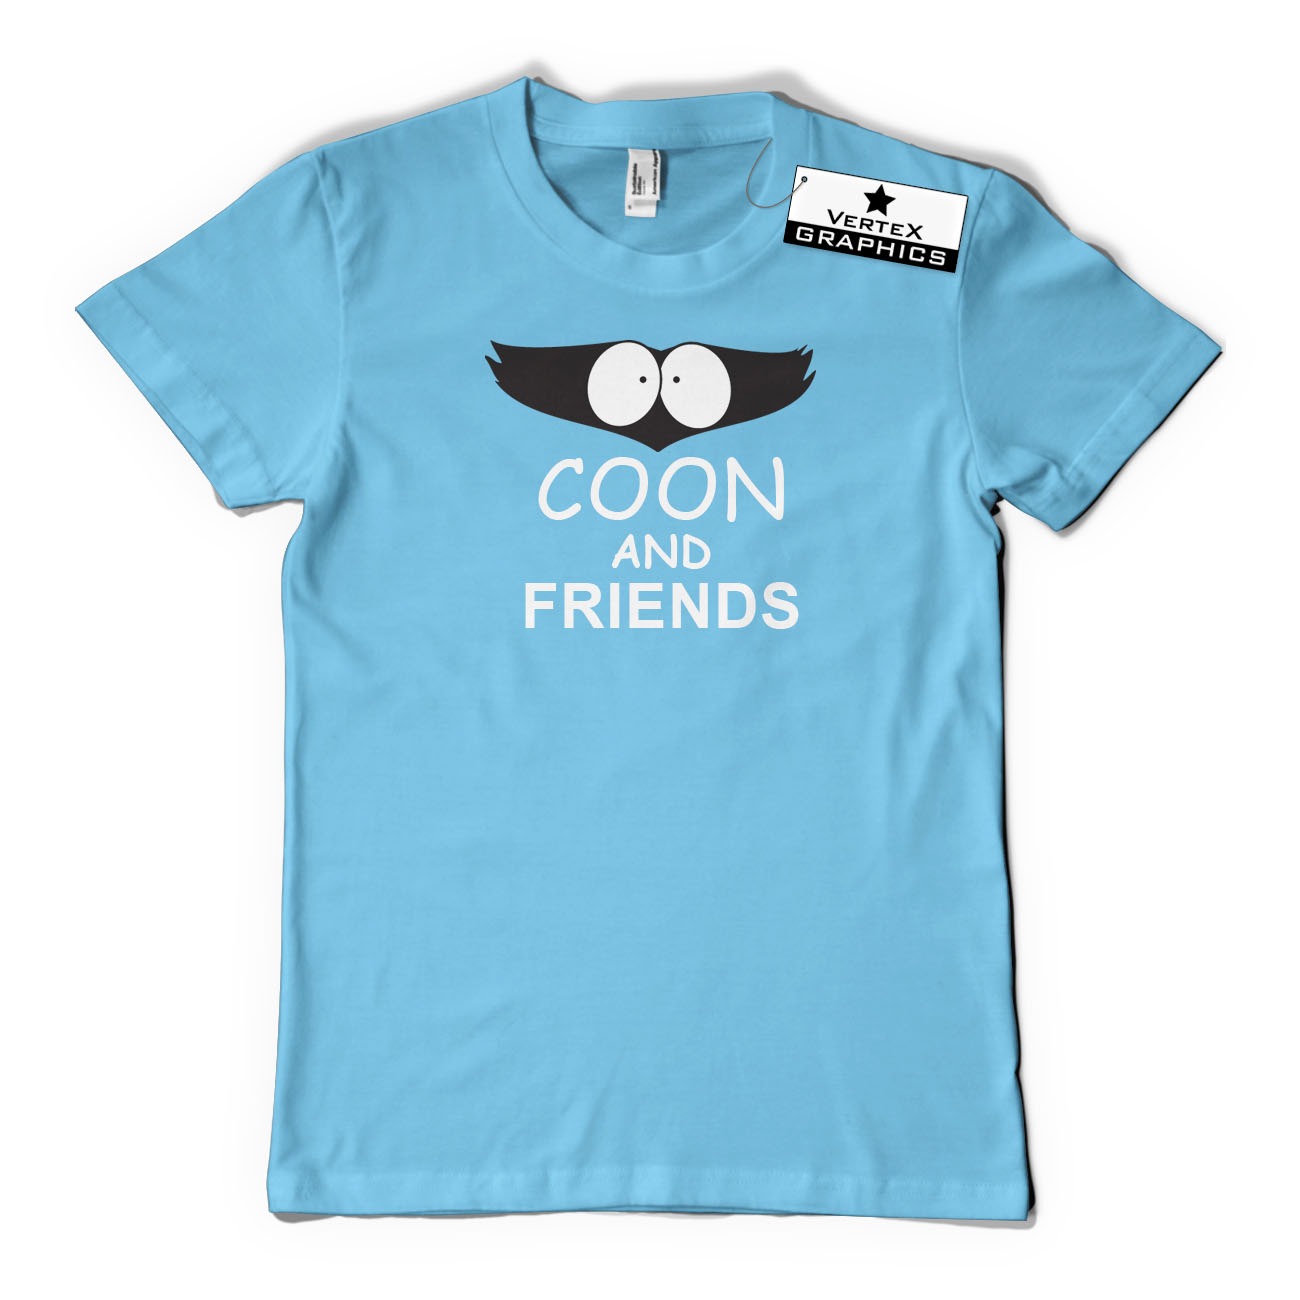 Coon and Friends T-Shirt Funny, Gift, TV | Park, Slogan, South eBay 